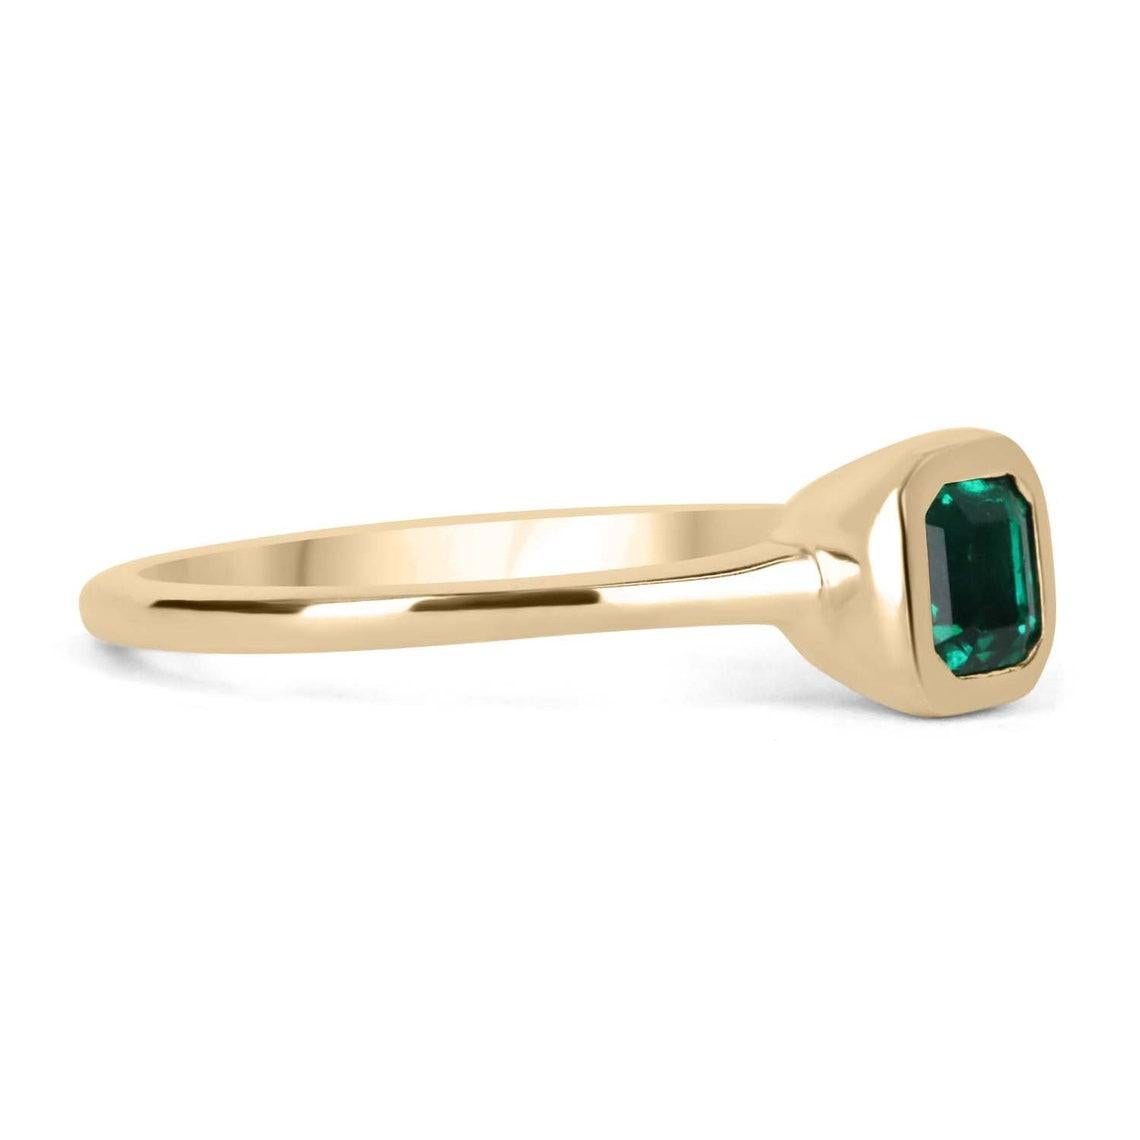 Displayed is a bespoke Colombian emerald solitaire emerald-cut engagement/right-hand ring in 18K yellow gold. This gorgeous solitaire ring carries an Asscher cut emerald in a bezel setting. Fully faceted, this gemstone showcases excellent shine. The